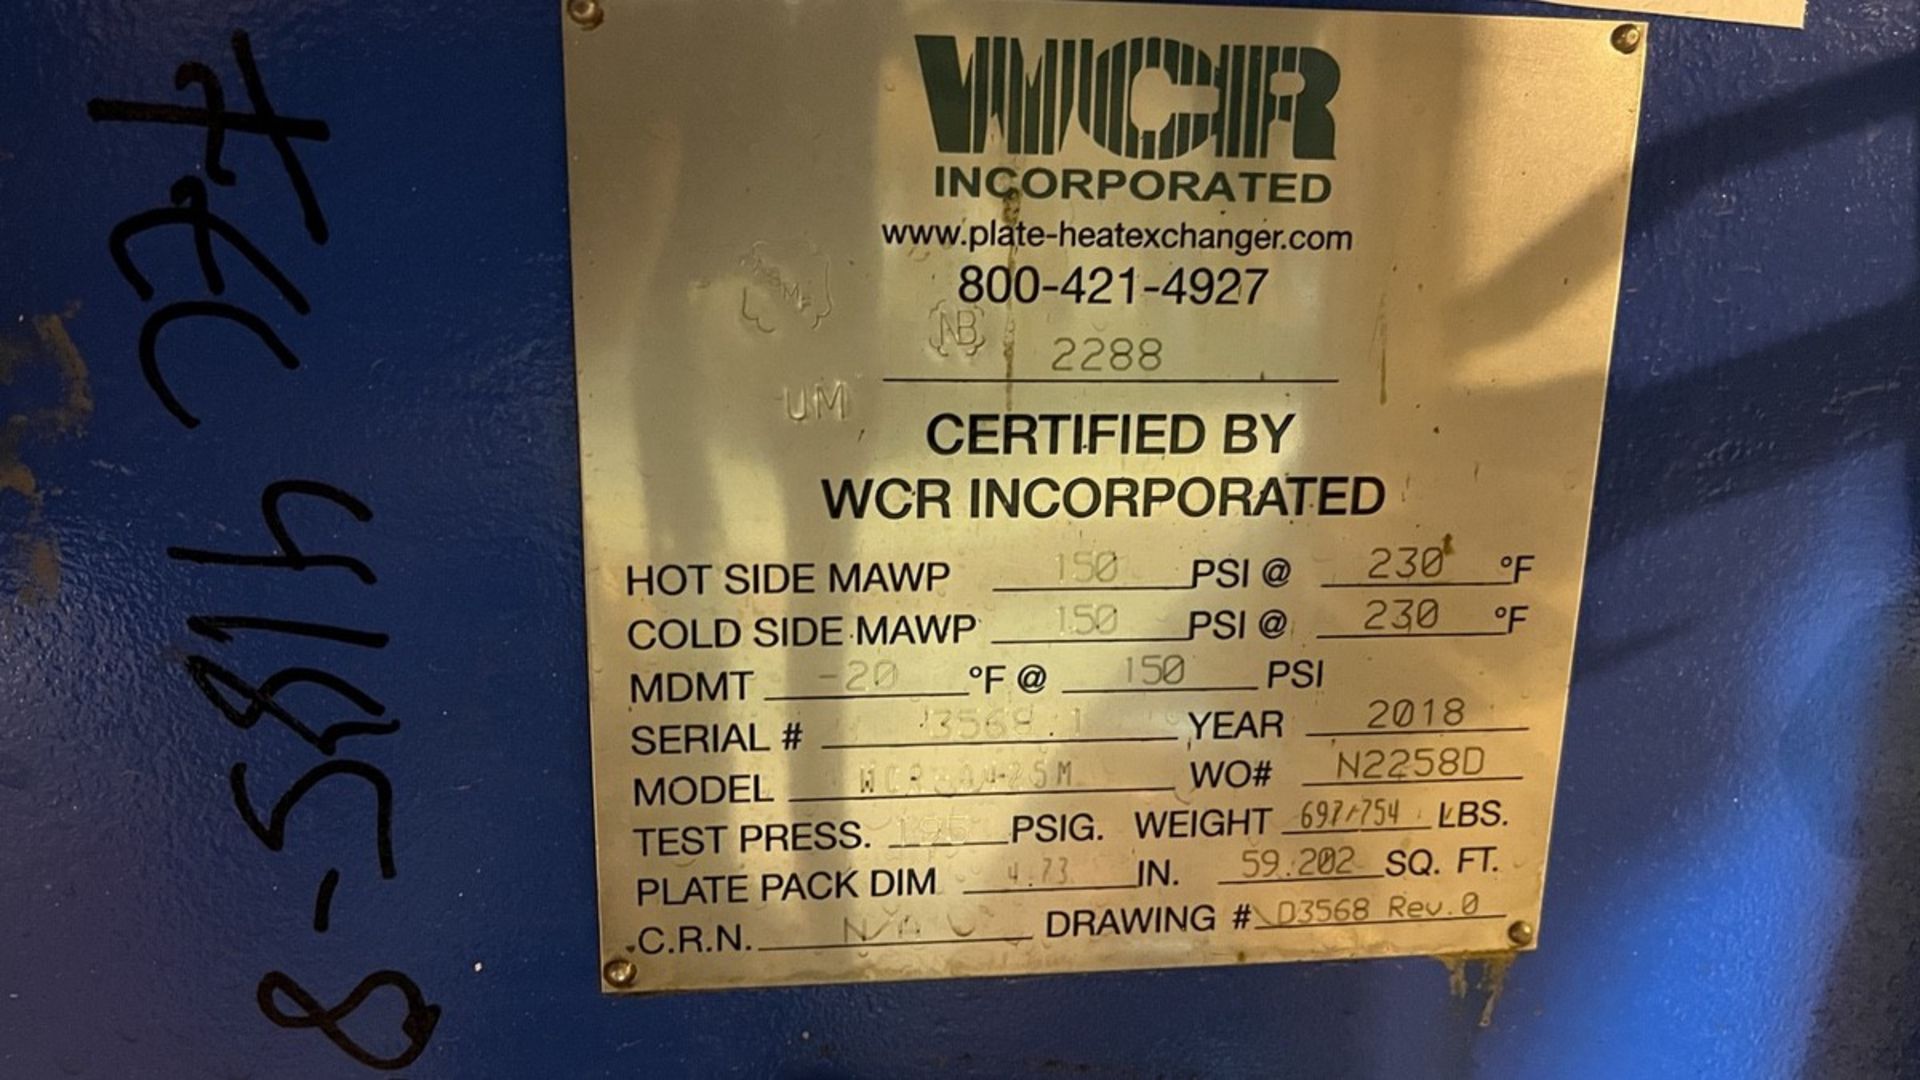 59 Sq Ft Wcr Plate Heat Exchanger, Model Wcra425M, Stainless Steel Plates | Rig Fee $50 - Image 2 of 3